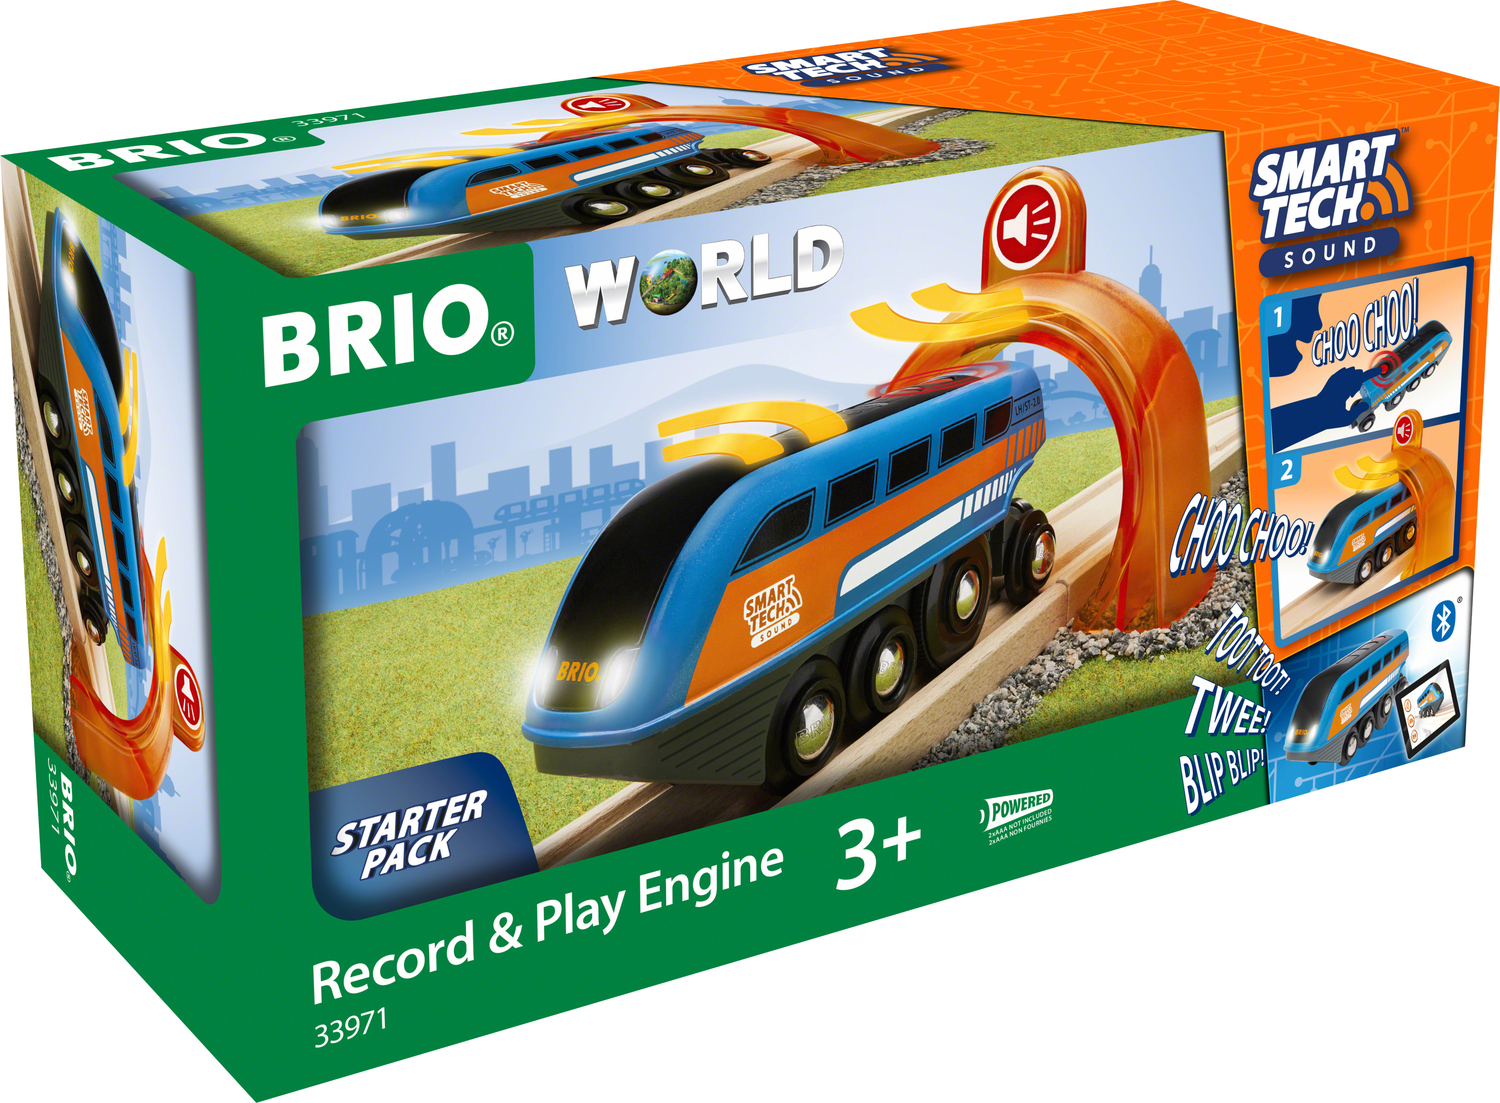 Brio Smart Tech Sound Record Play Engine - Teaching Toys and Books